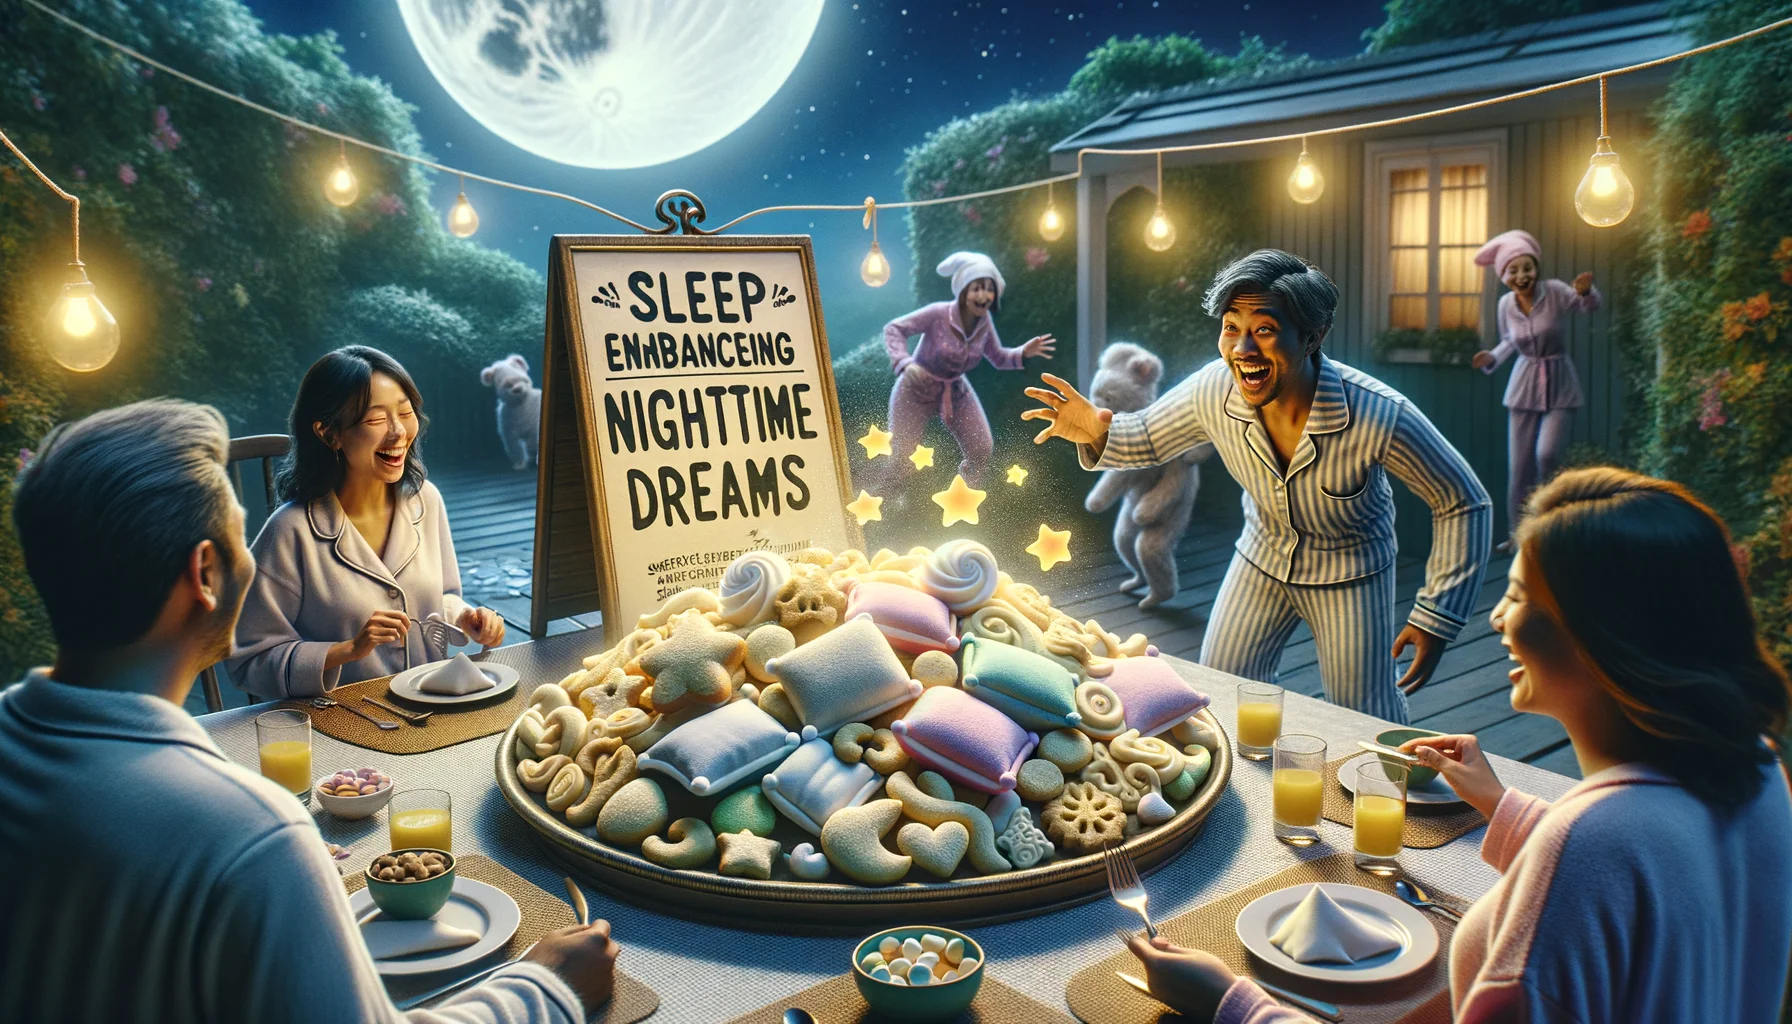 Imagine an amusing, realistic scene that exudes nighttime tranquility. There is a beautifully set, moonlit dining table outdoors, with a platter of 'Sleep-Enhancing Nighttime Sweets' in the center. These sweets have whimsical shapes related to sleep, like mini pillow-shaped marshmallows and star-shaped cookies. Some sweets even have tiny edible images of gentle, sleeping animals on them. A soft, dreamy aura surrounds the platter, symbolizing their sleep-inducing qualities. On the table, there is also a whimsical signboard that humorously advertises these as 'Sweets for deep, delicious dreams'. Nearby, a South Asian man and a Hispanic woman, both in cozy pyjamas, are laughing and preparing to taste these treats, amused by the whole setup.